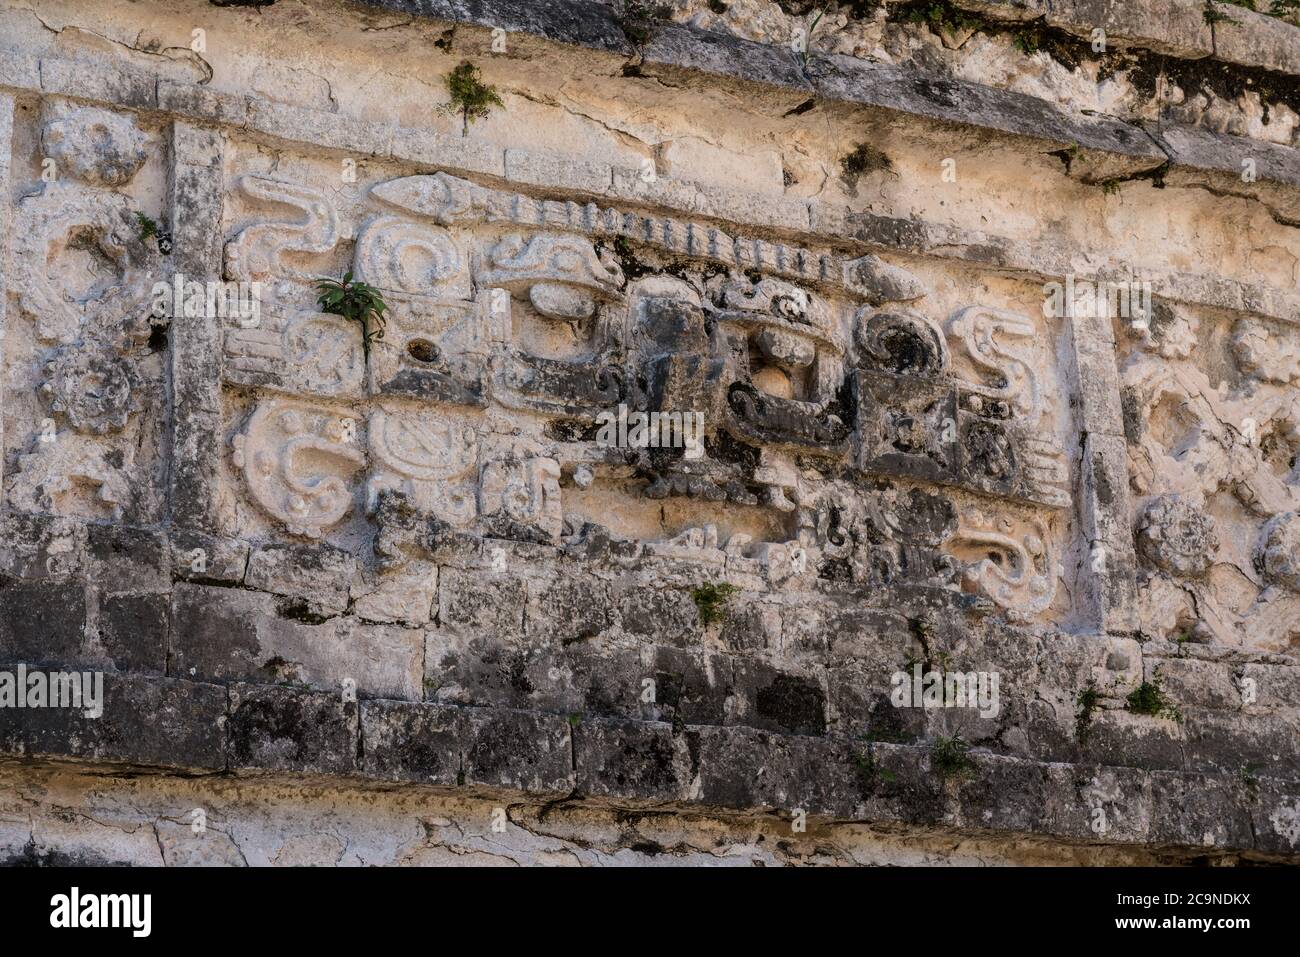 A carved stone Chaac mask in the Nunnery Complex in the ruins of the great Mayan city of Chichen Itza, Yucatan, Mexico. Stock Photo